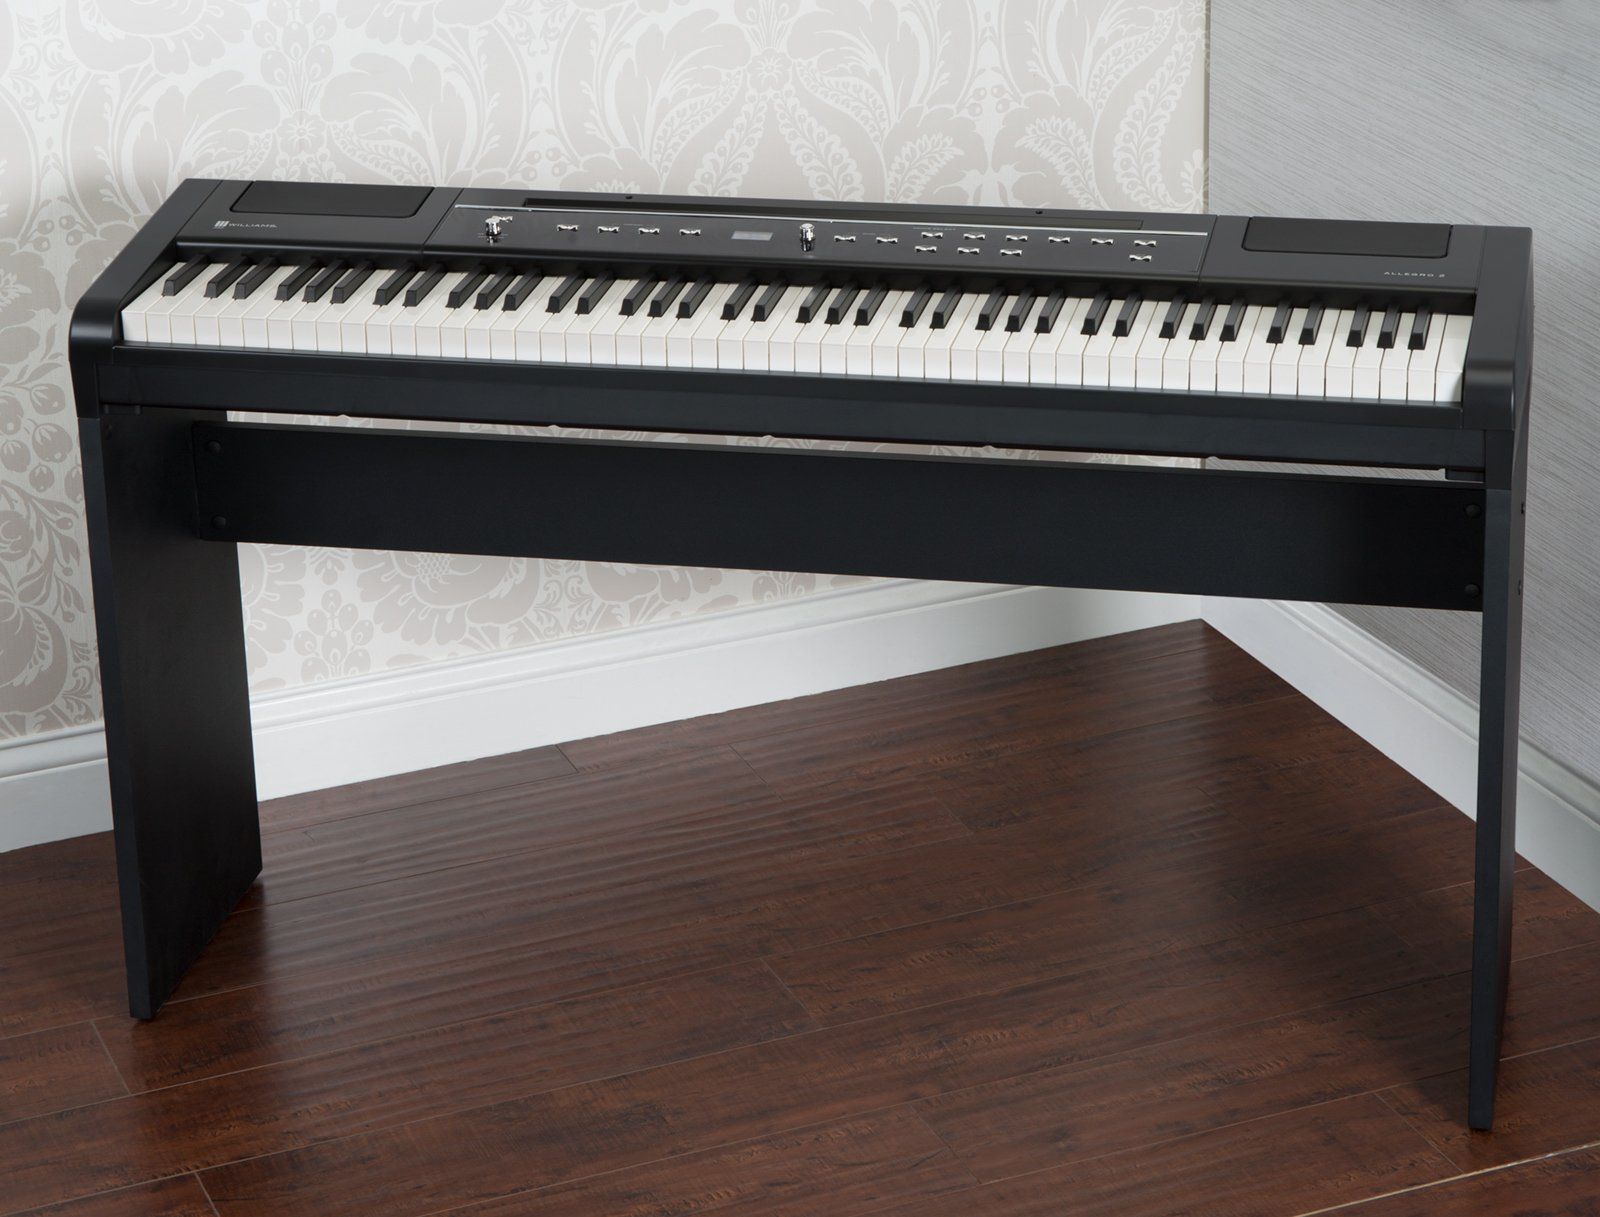 How To Connect An Amplifier To A Williams Allegro 2 Plus Digital Piano